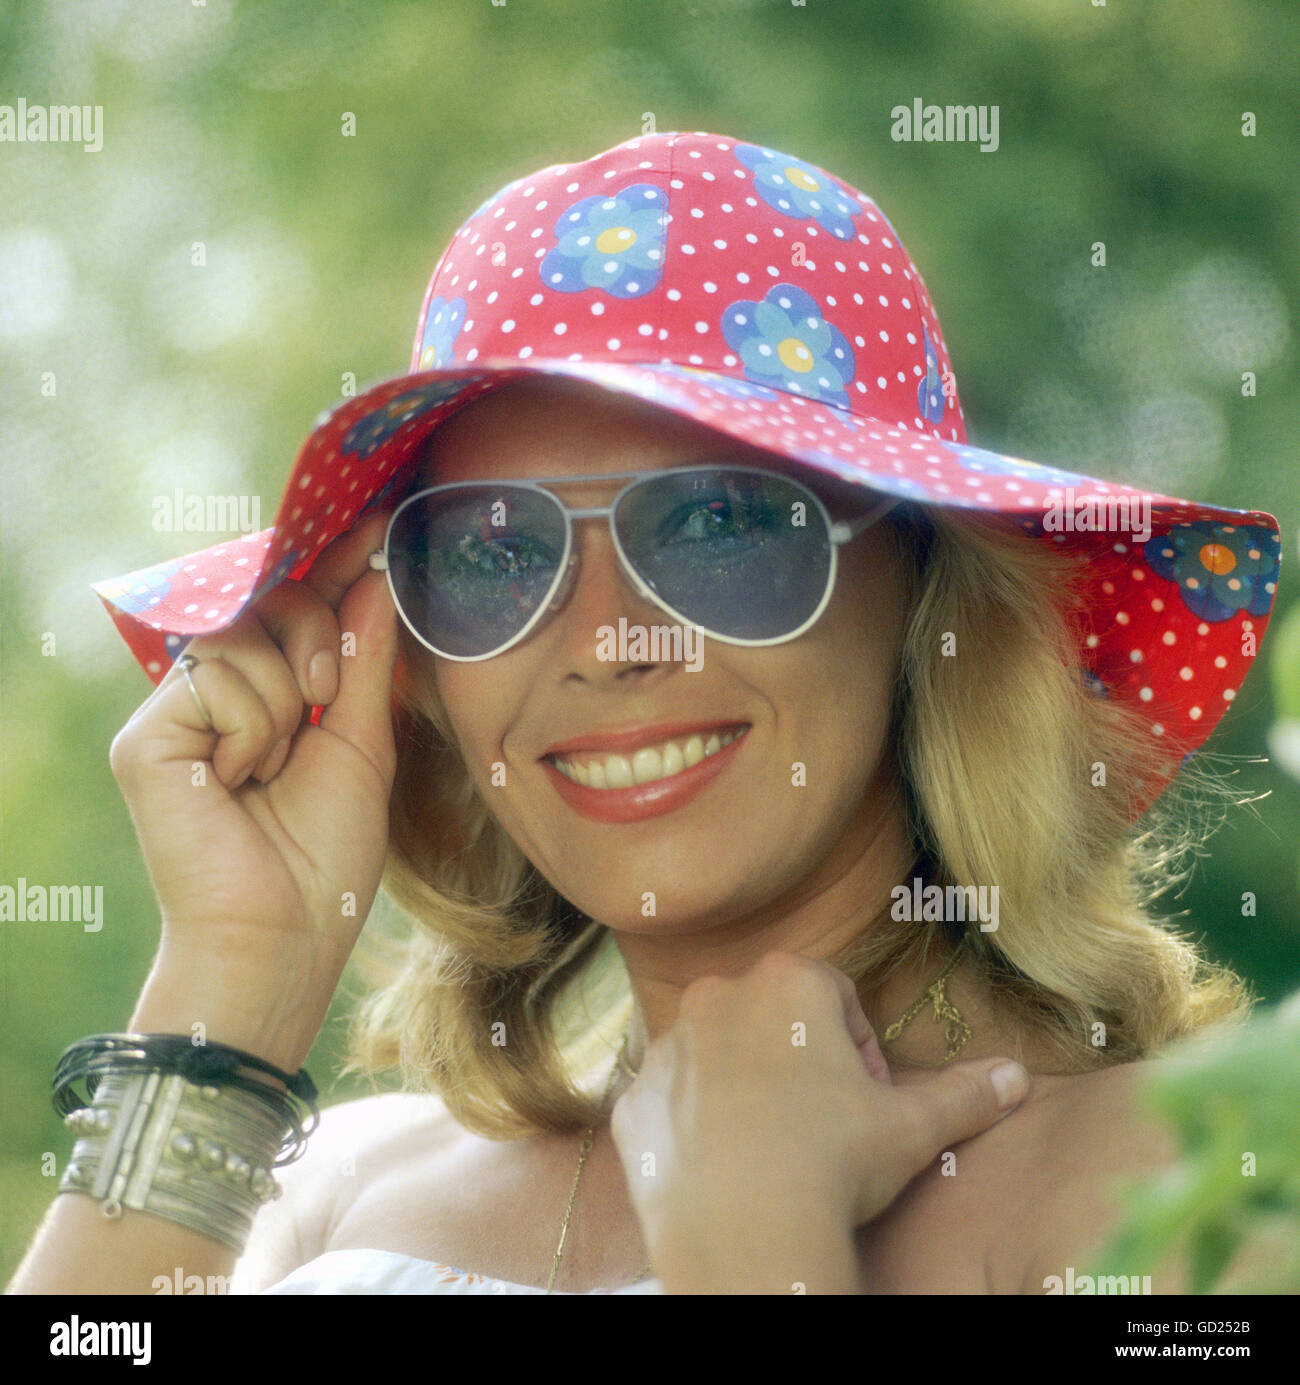 Mode, Damenmode, Kopfbedeckung, Frau mit Hut und Sonnenbrille, 1975, Additional-Rights-Clearences-not available Stockfoto